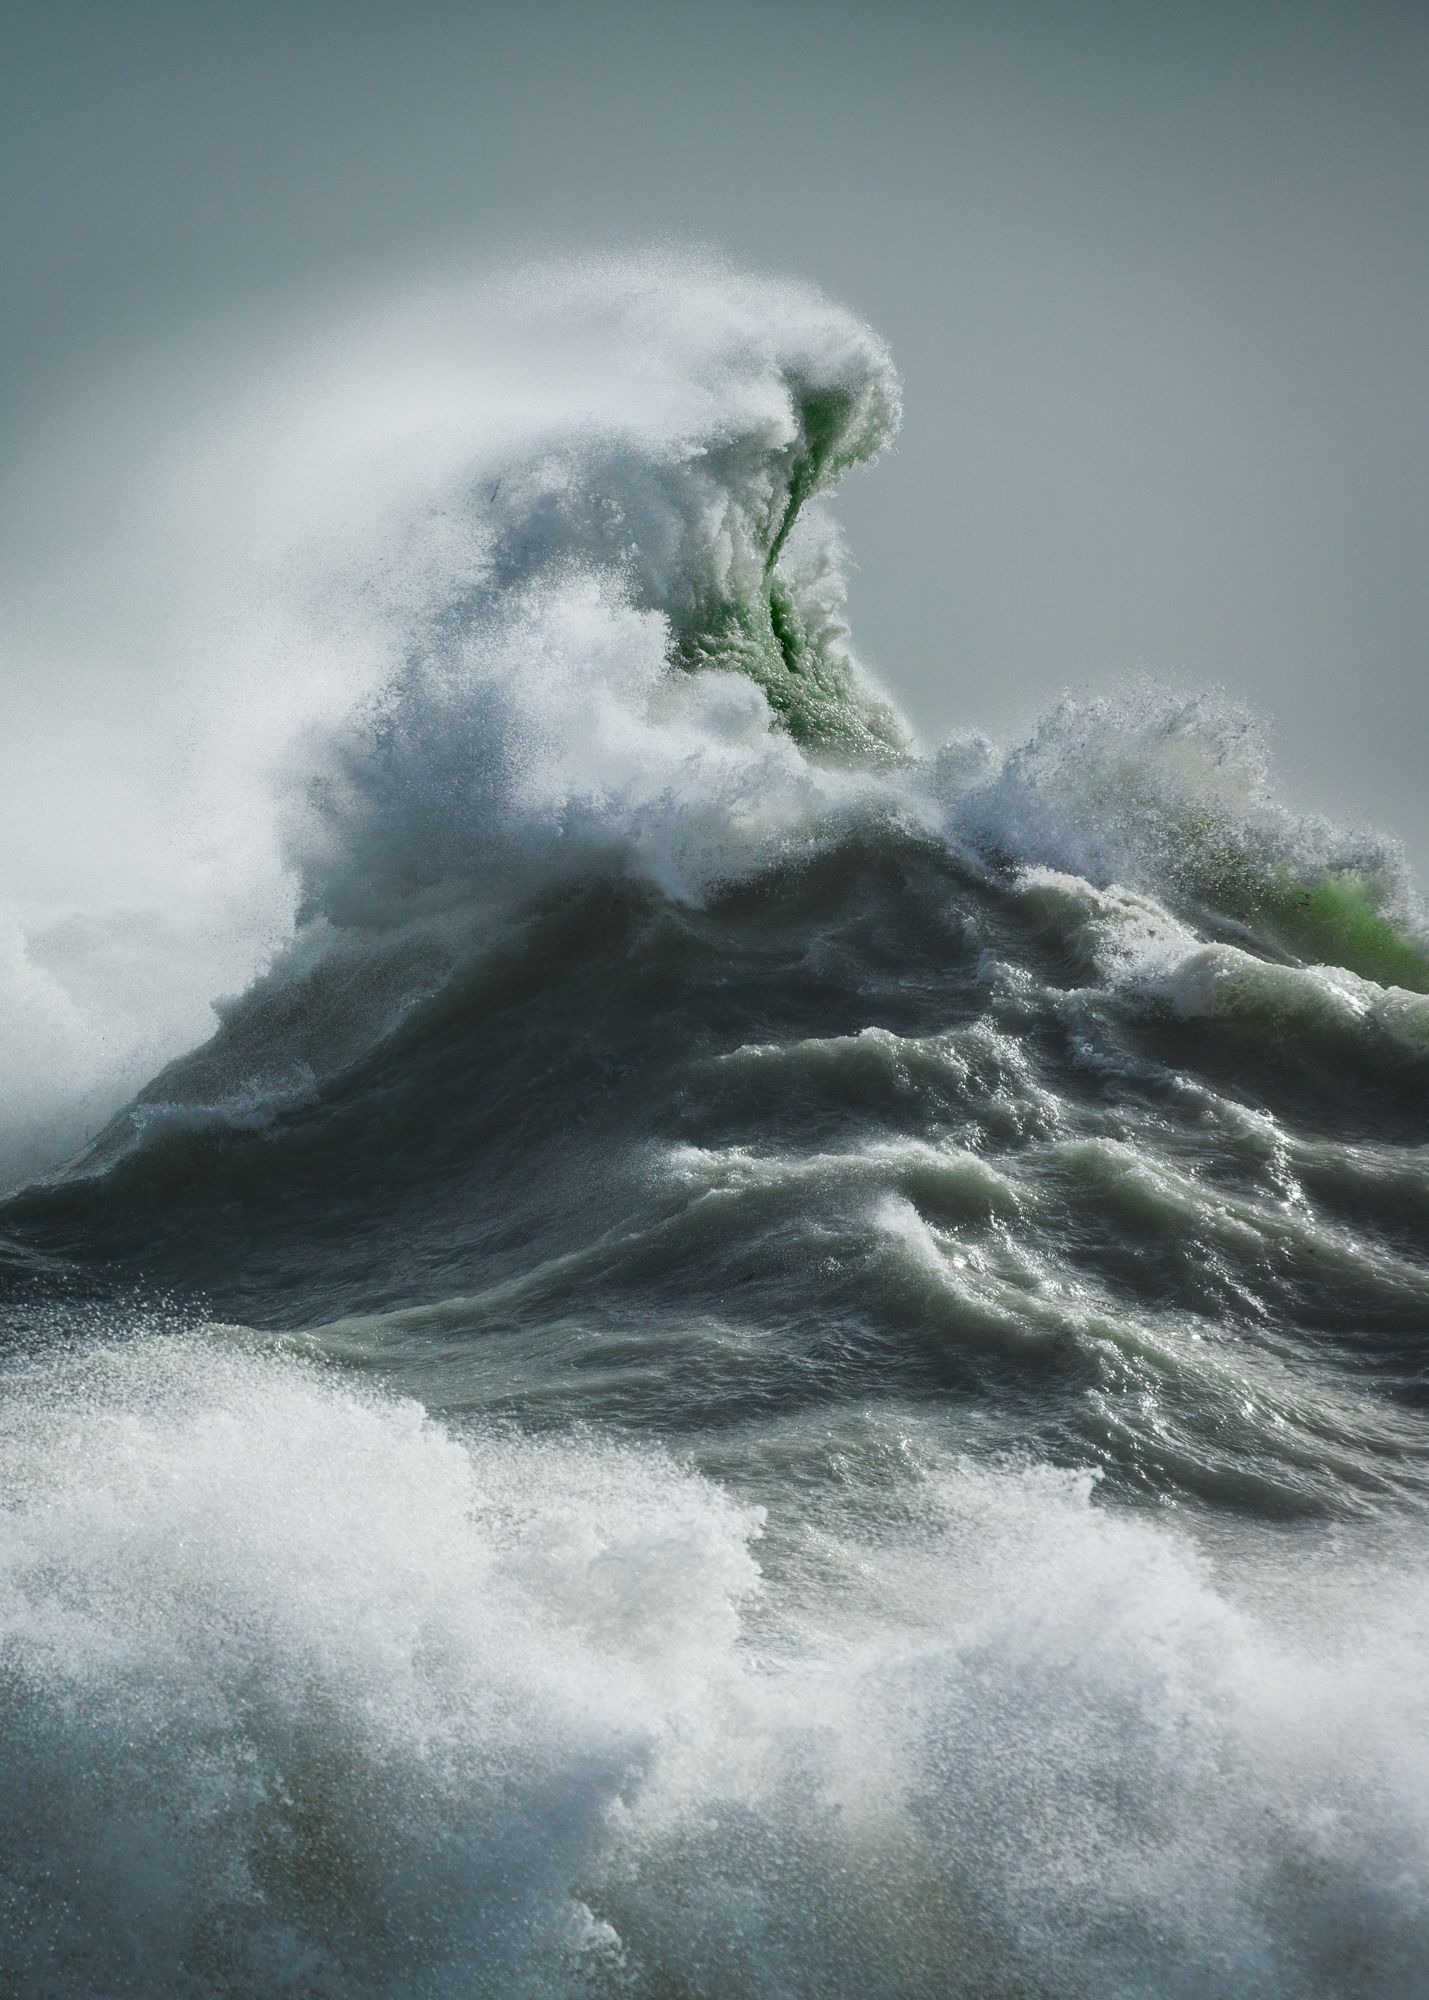 Mythical Creatures and Greek Gods Leap From Waves Captured off the South Coast of England